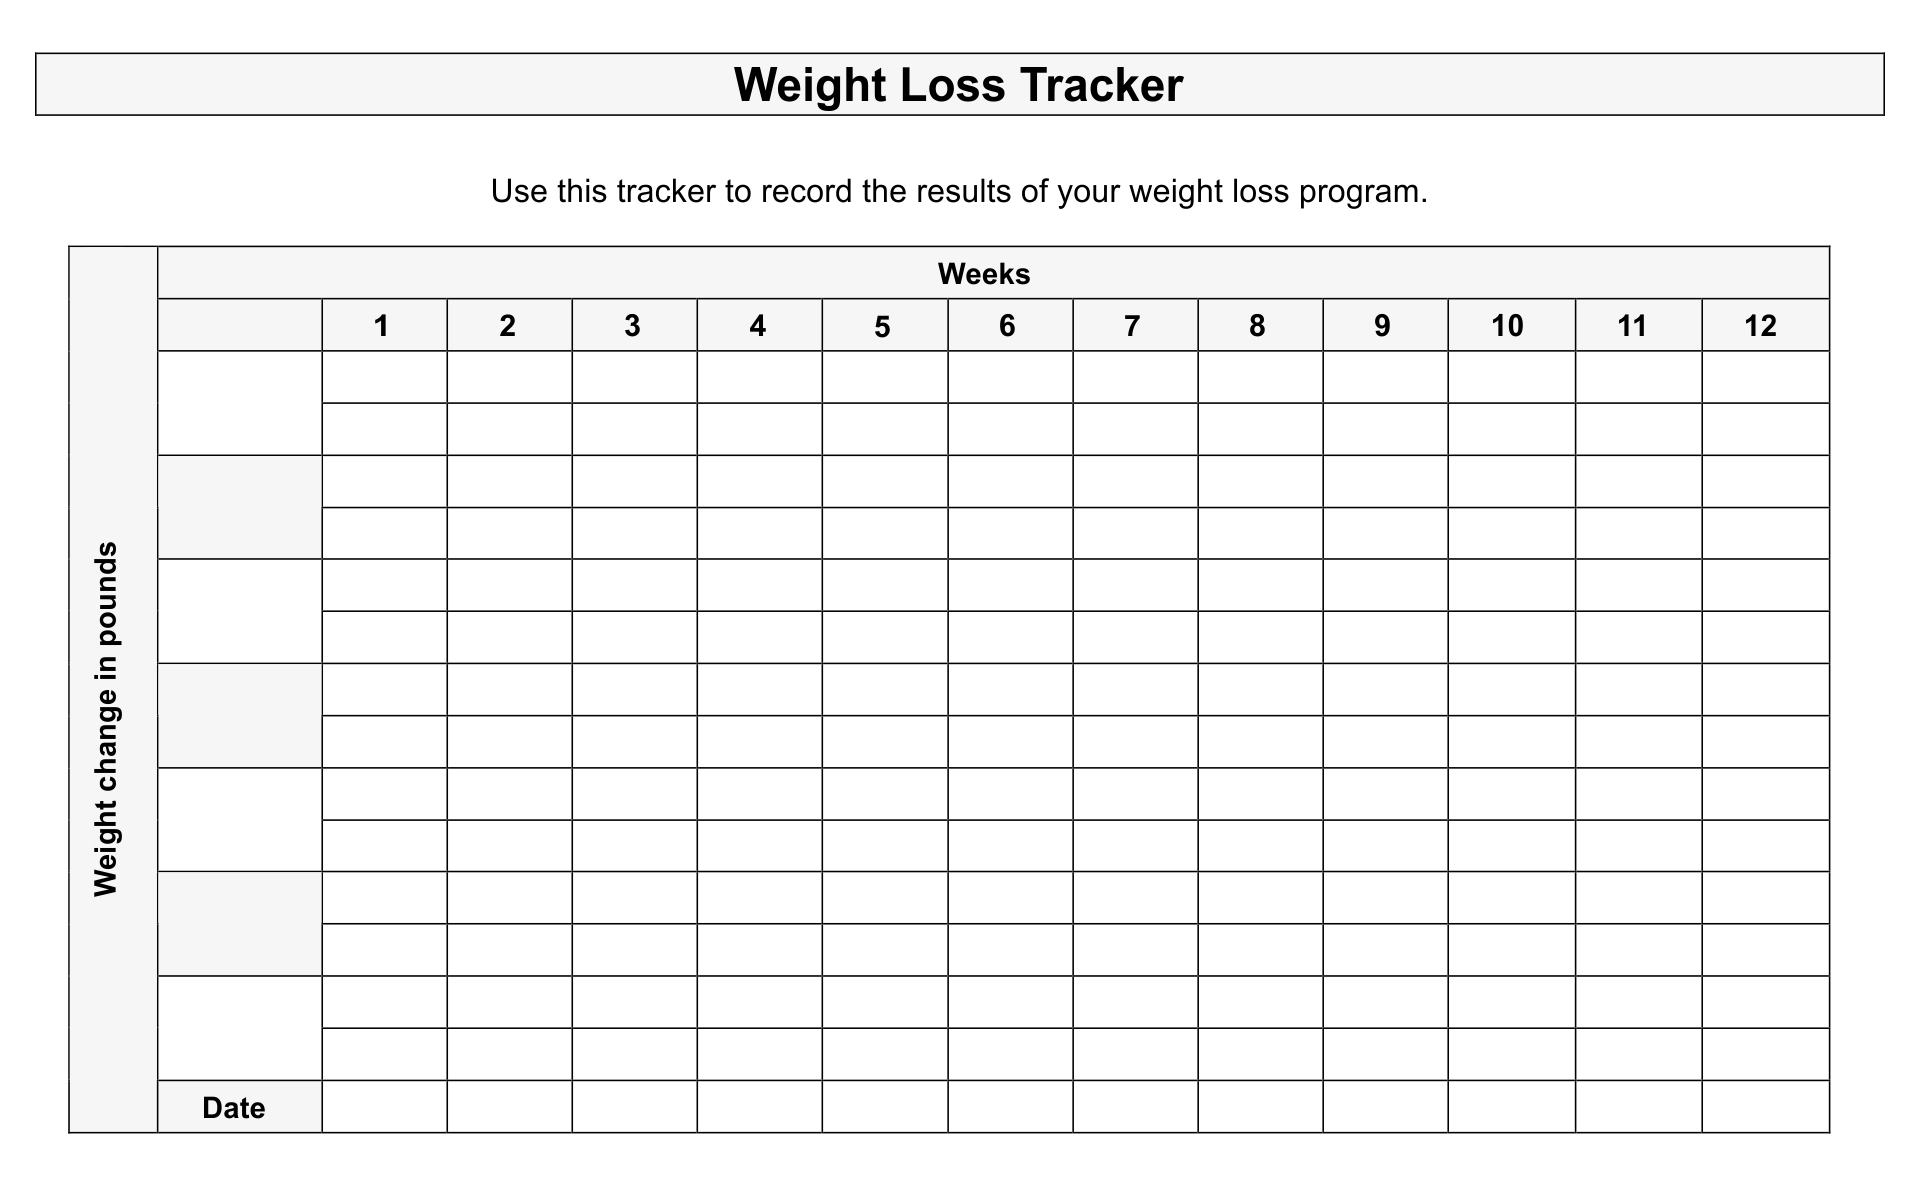 2021-weight-loss-calendar-printable-blank-weight-loss-tracker-template-2021-collections-replay